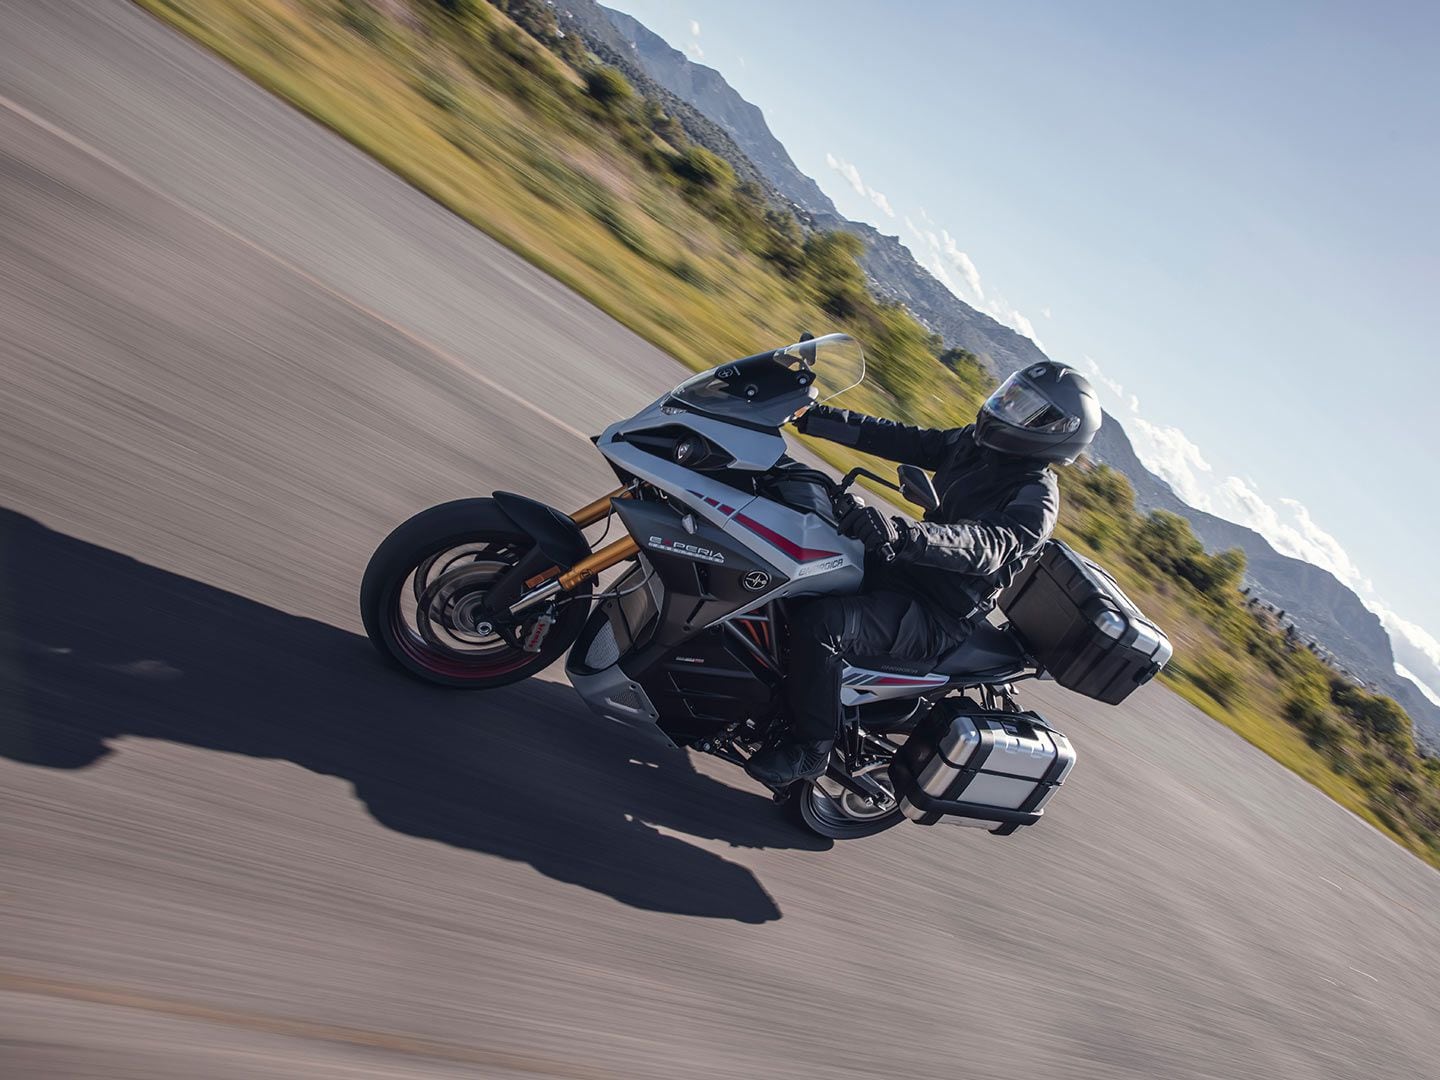 The Energica Experia pushes the range boundaries of electric bikes and offers some choice adventure-touring amenities.